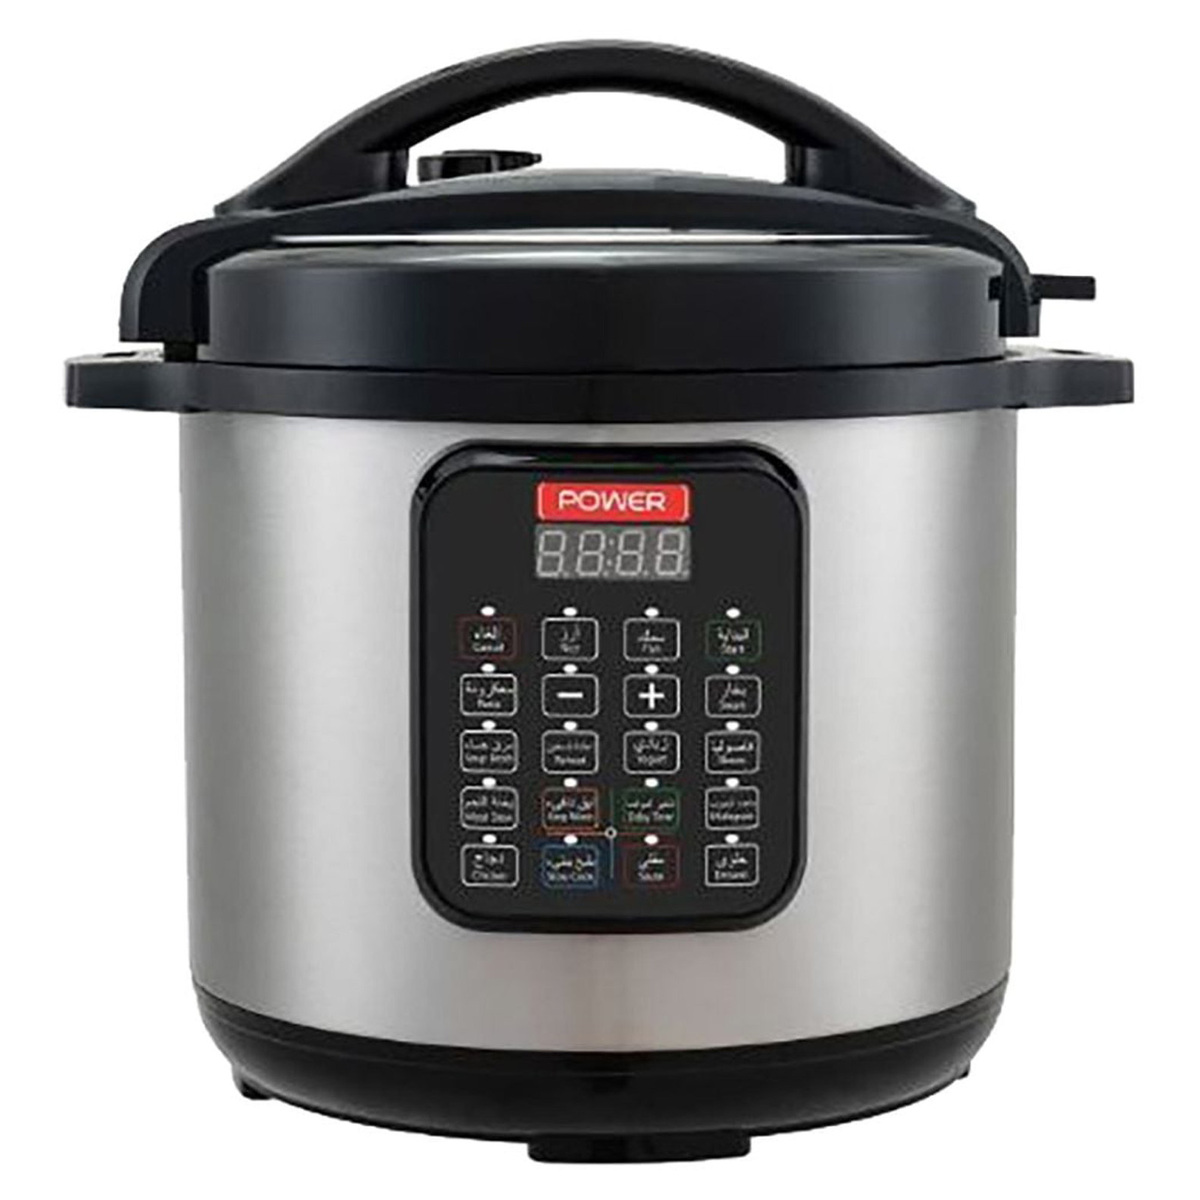 Power Electric Rice Cooker, 12 L, Silver, Pepca1812L